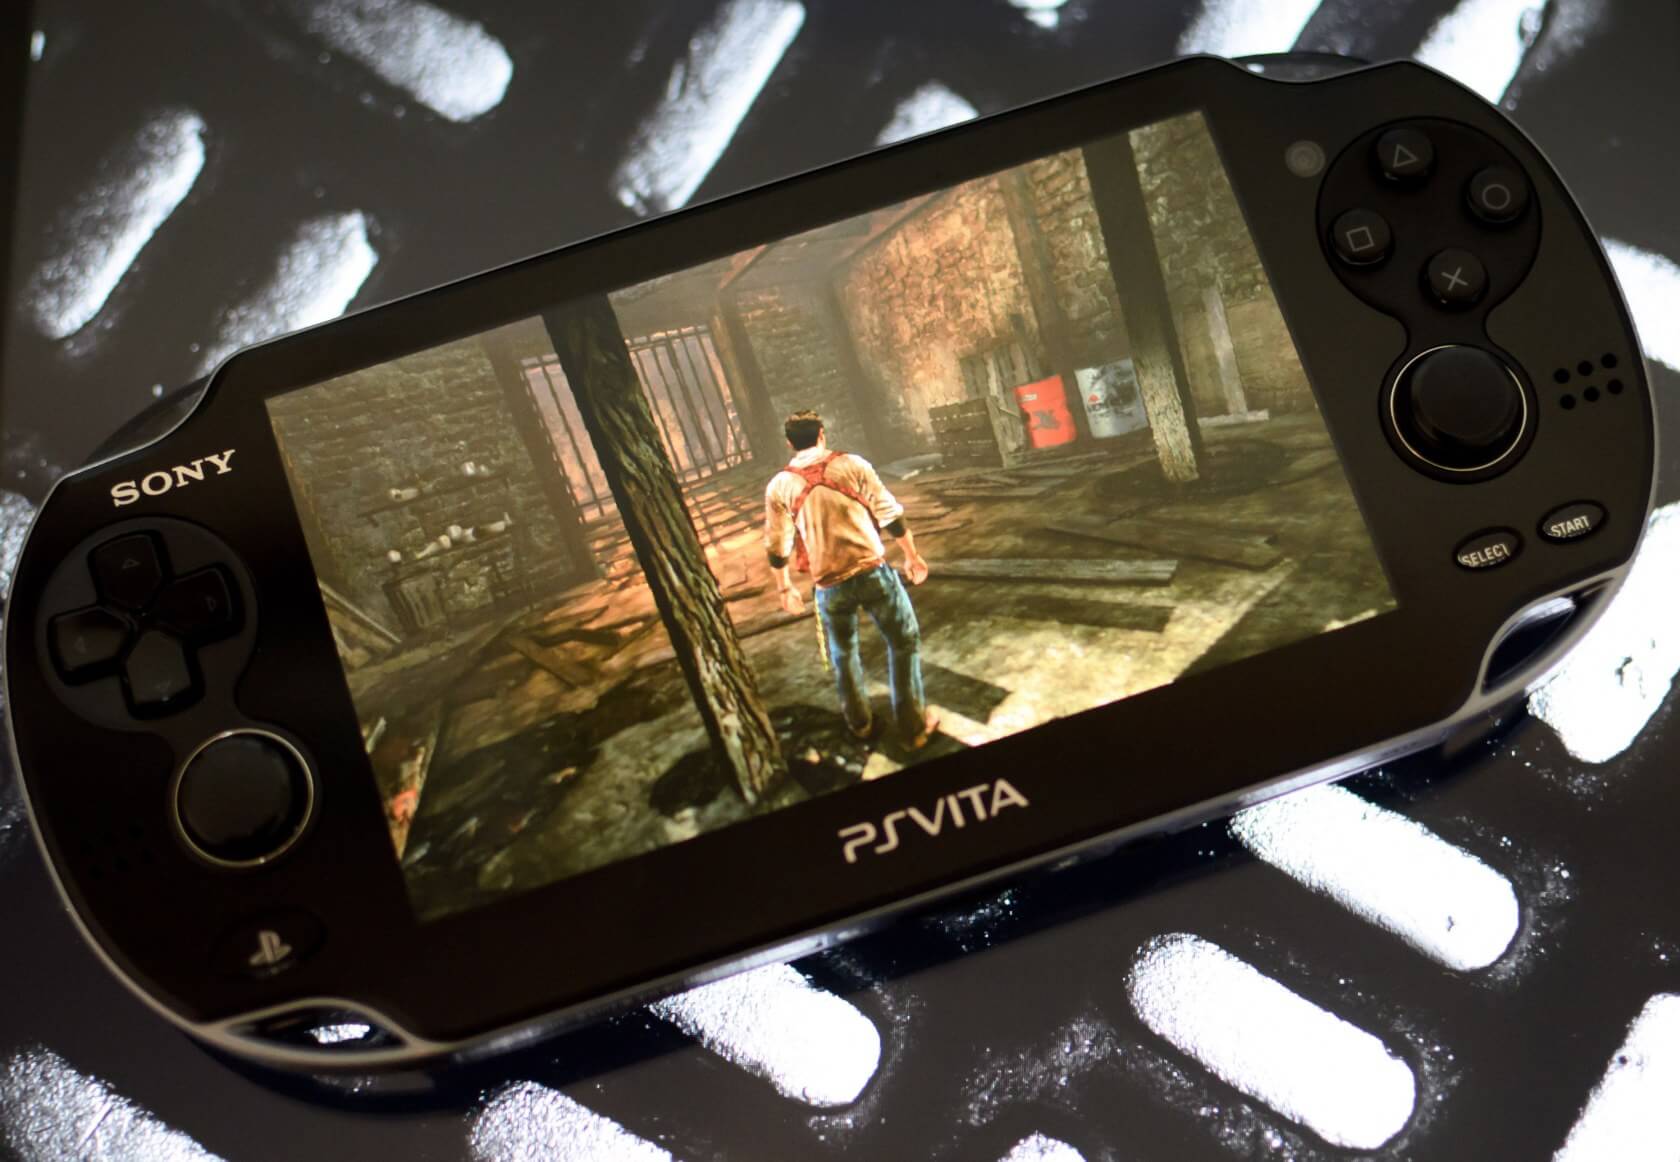 Sony has quit making the PS Vita, seven years after its release